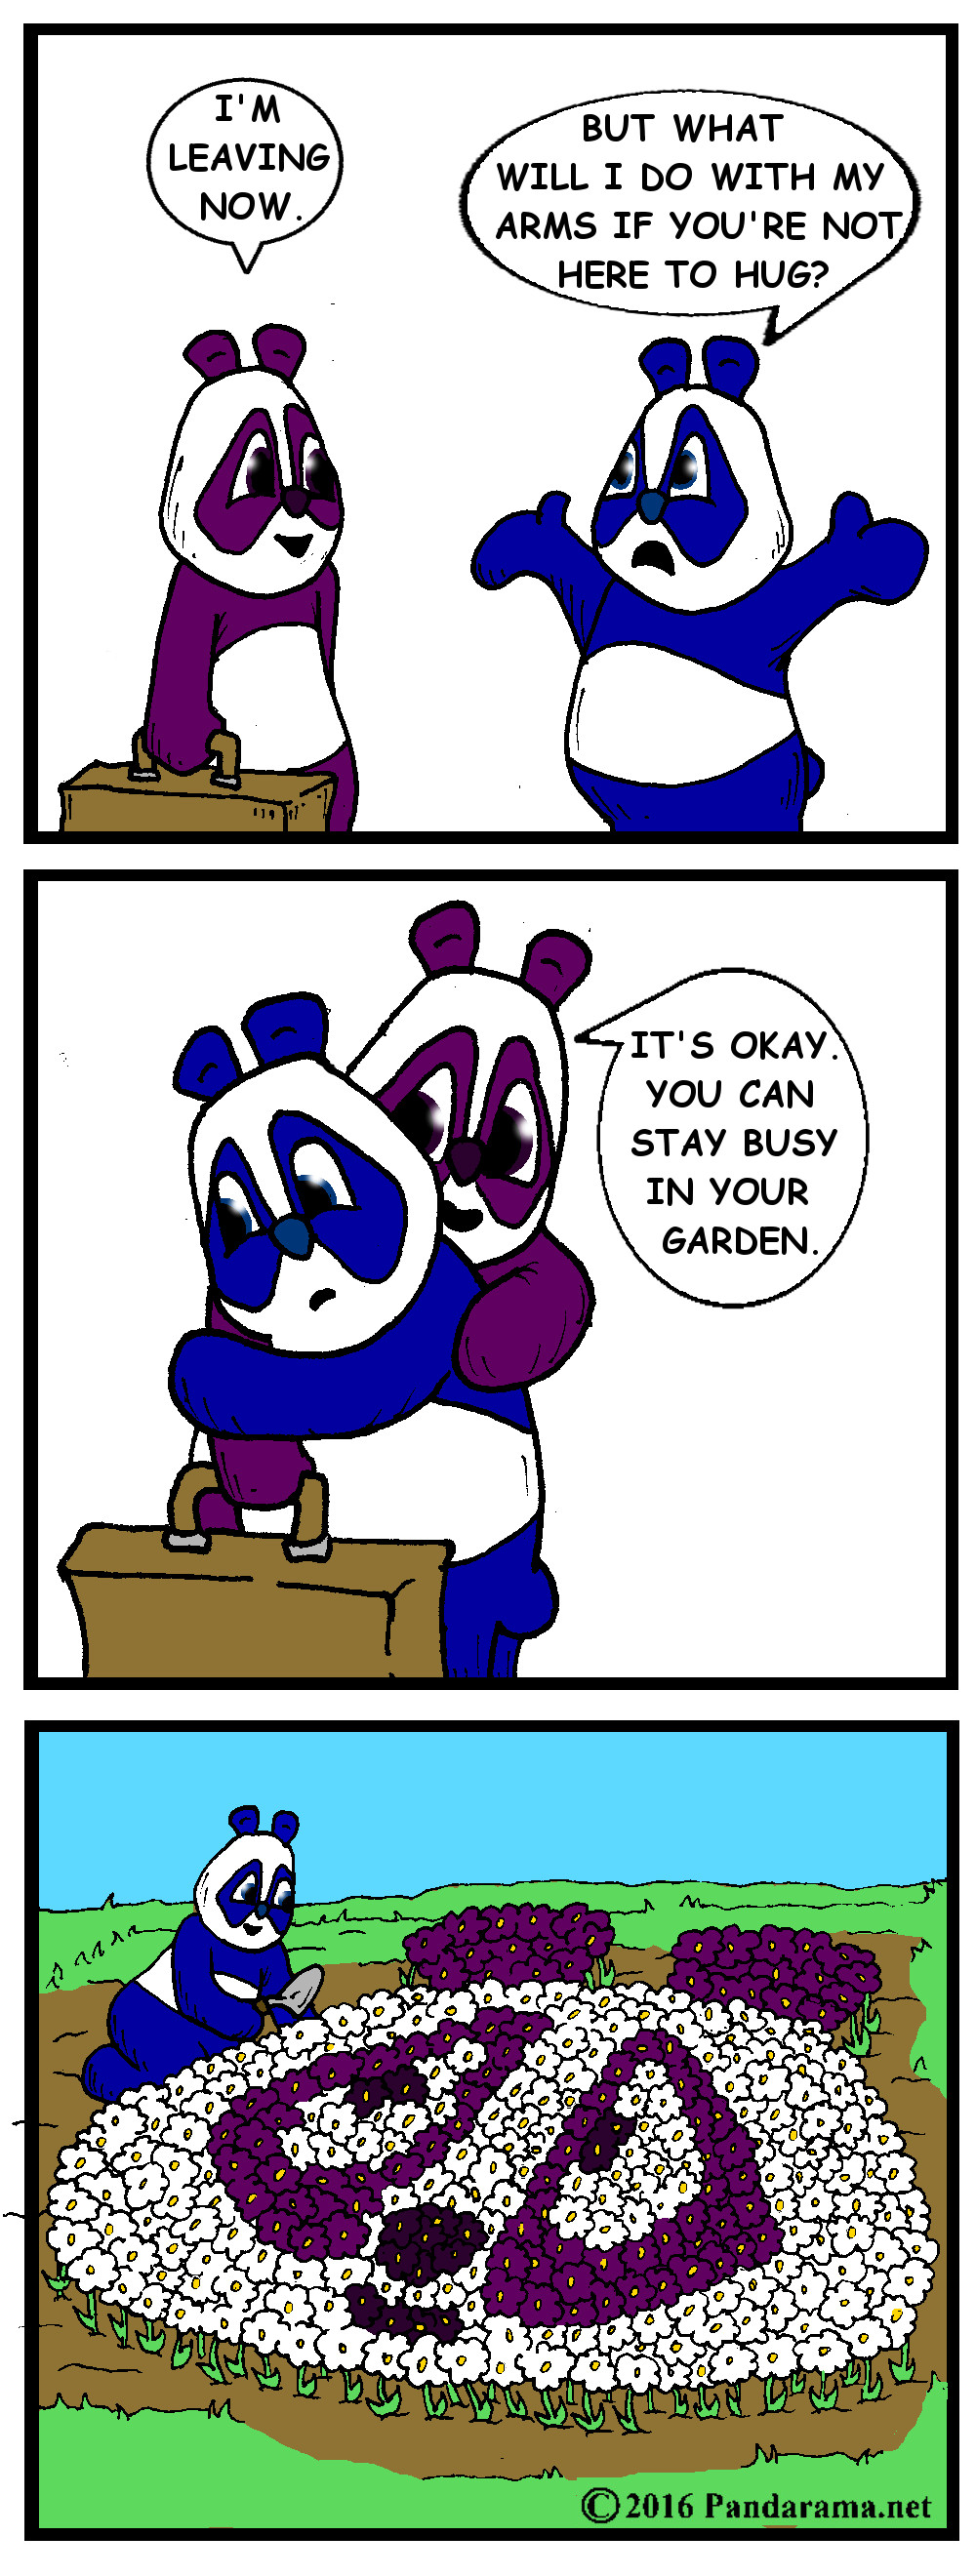 Pandarama cartoon, 'I'm leaving', 'what'll i do when you're gone', 'work in your garden', then the panda makes the garden look like the friend who left.